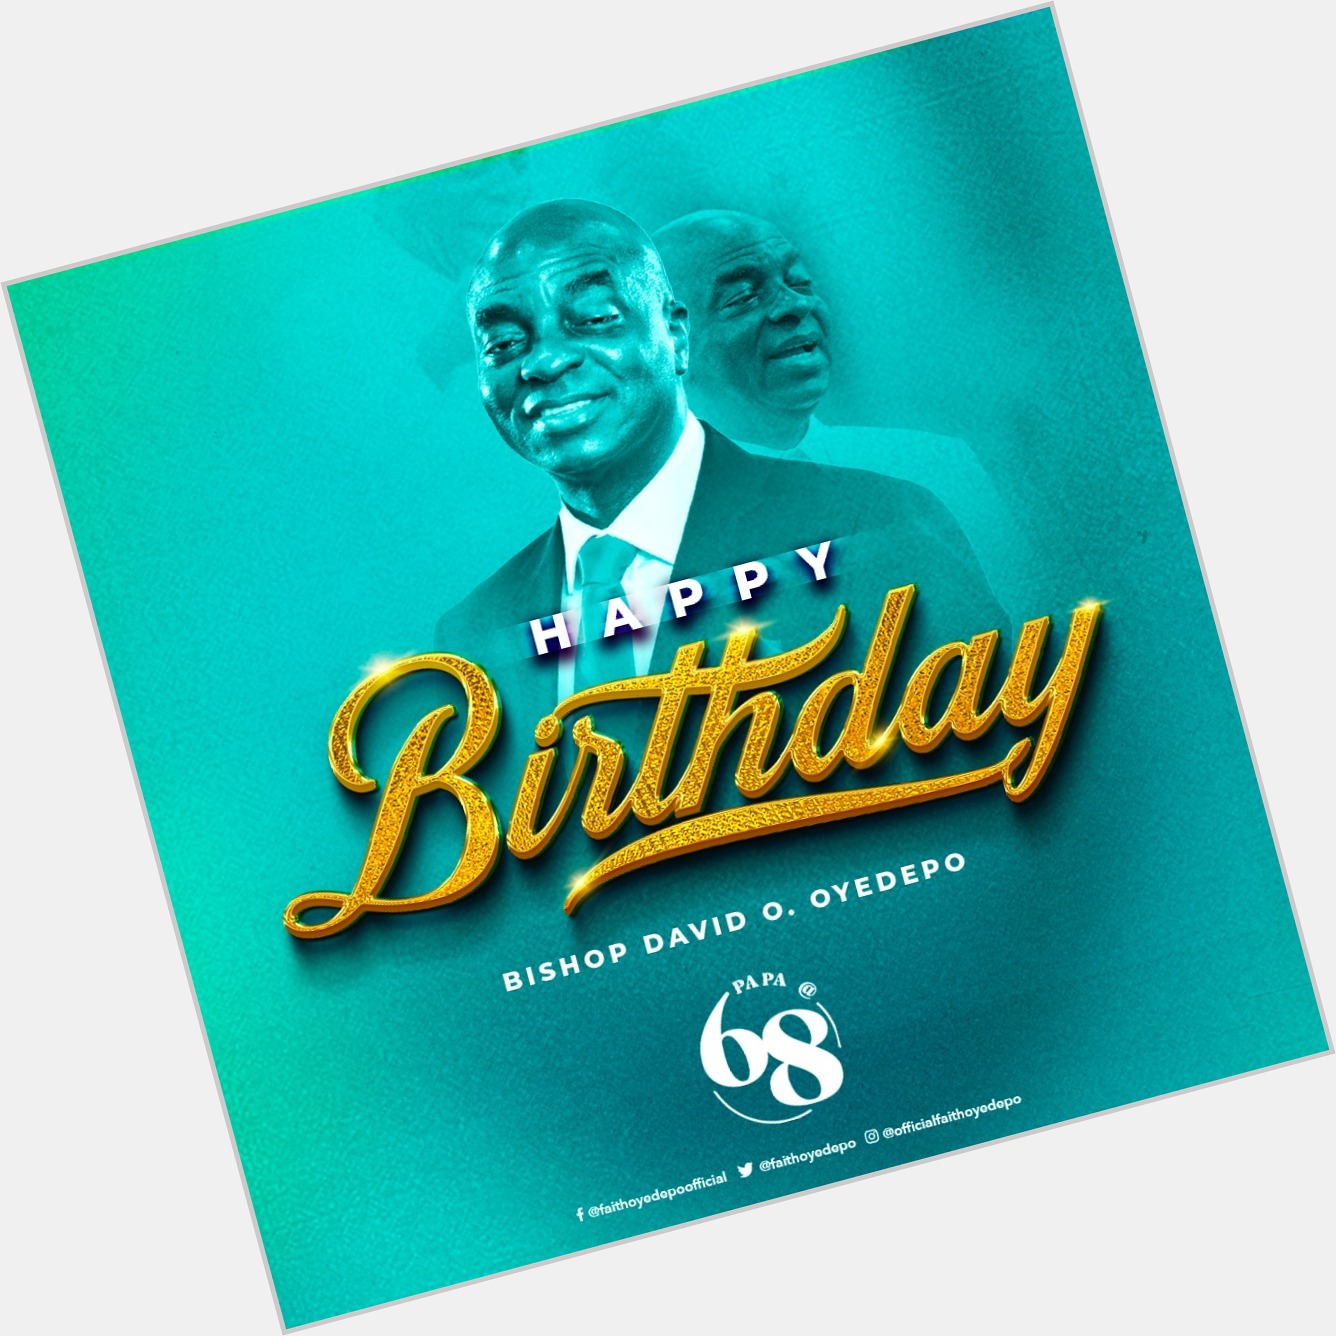 The gift of men, great men is not be one to despised. Happy Birthday Bishop David Oyedepo 